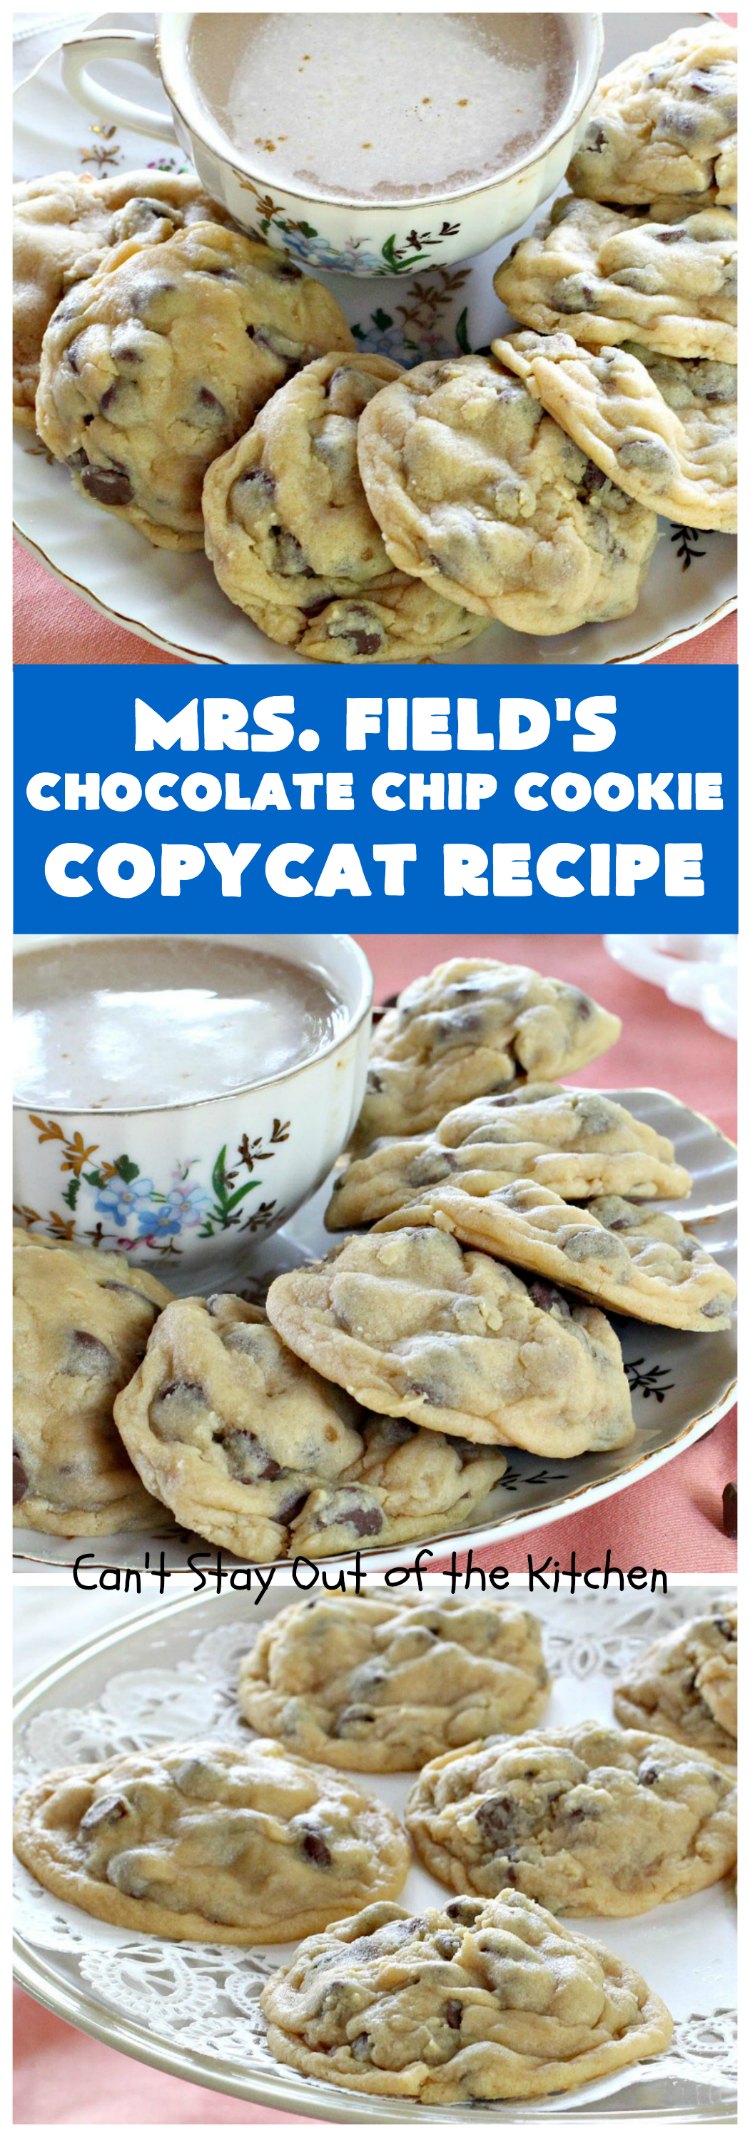 Mrs. Field's Chocolate Chip Cookie Copycat Recipe | Can't Stay Out of the Kitchen